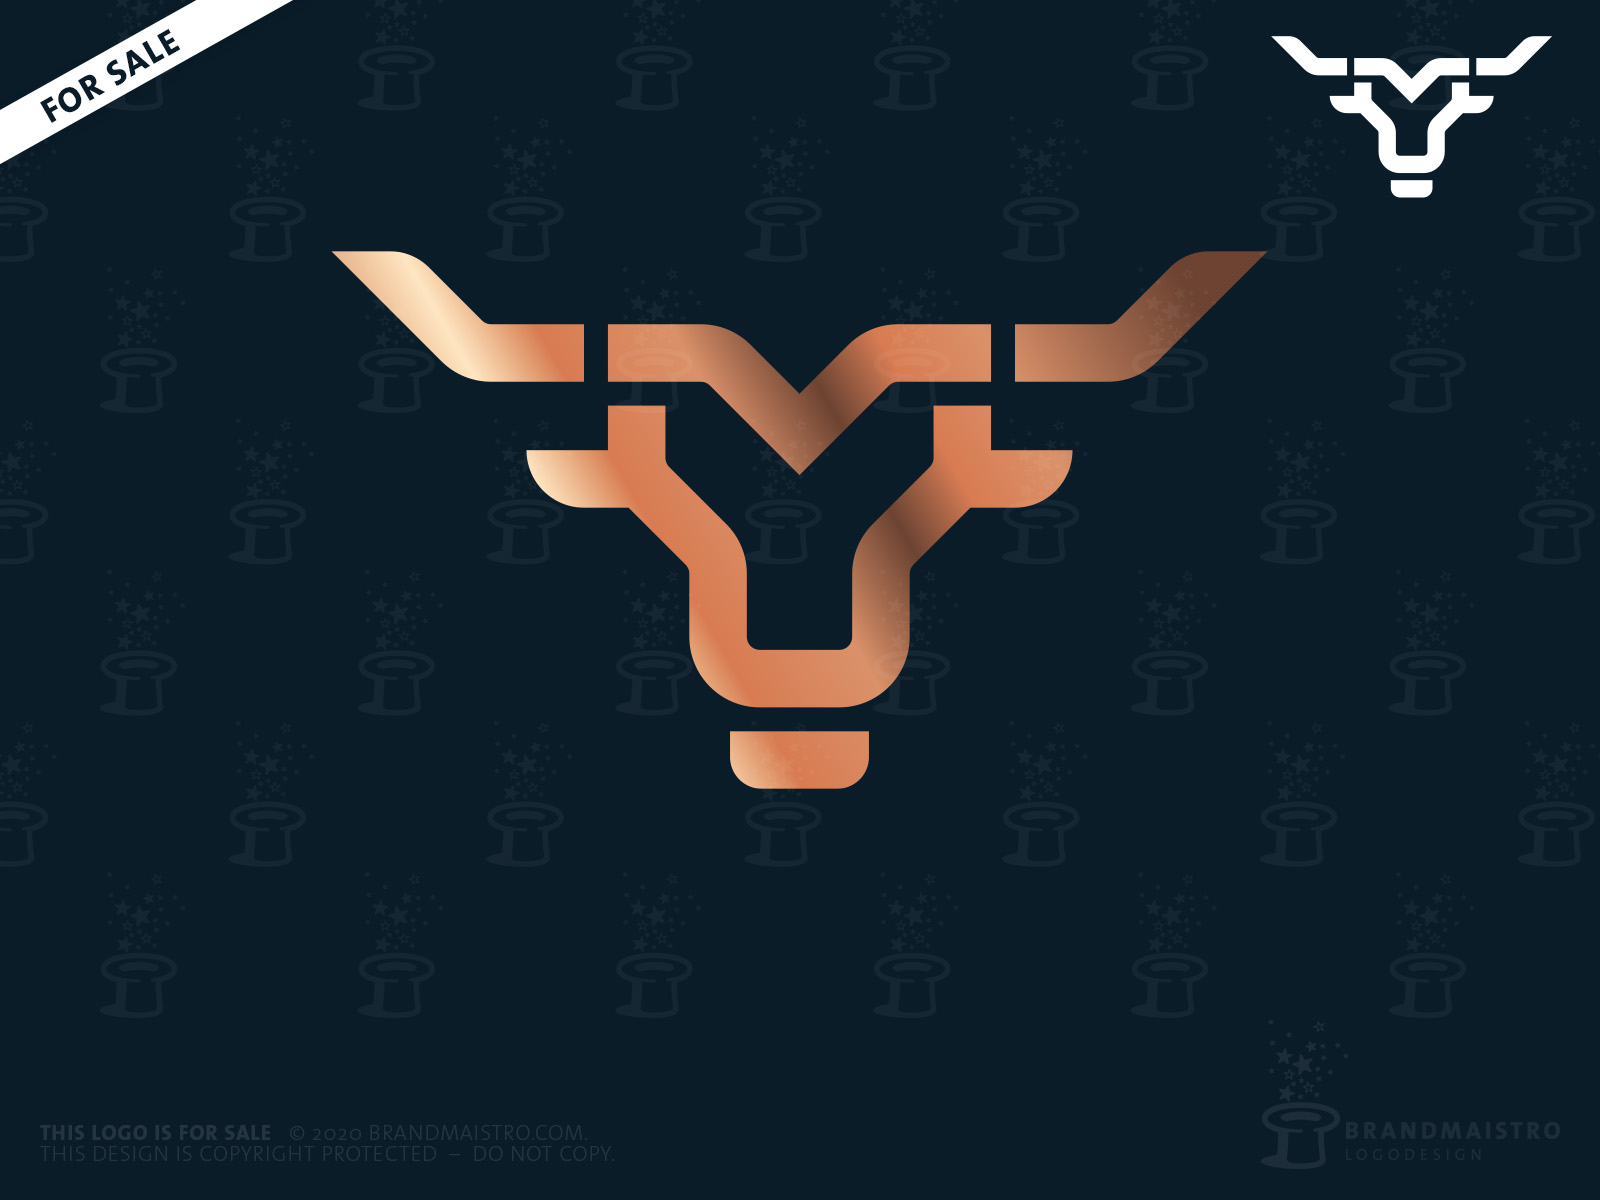 Strong Tech Bull Logo (logo sold to client) by Brandmaistro on